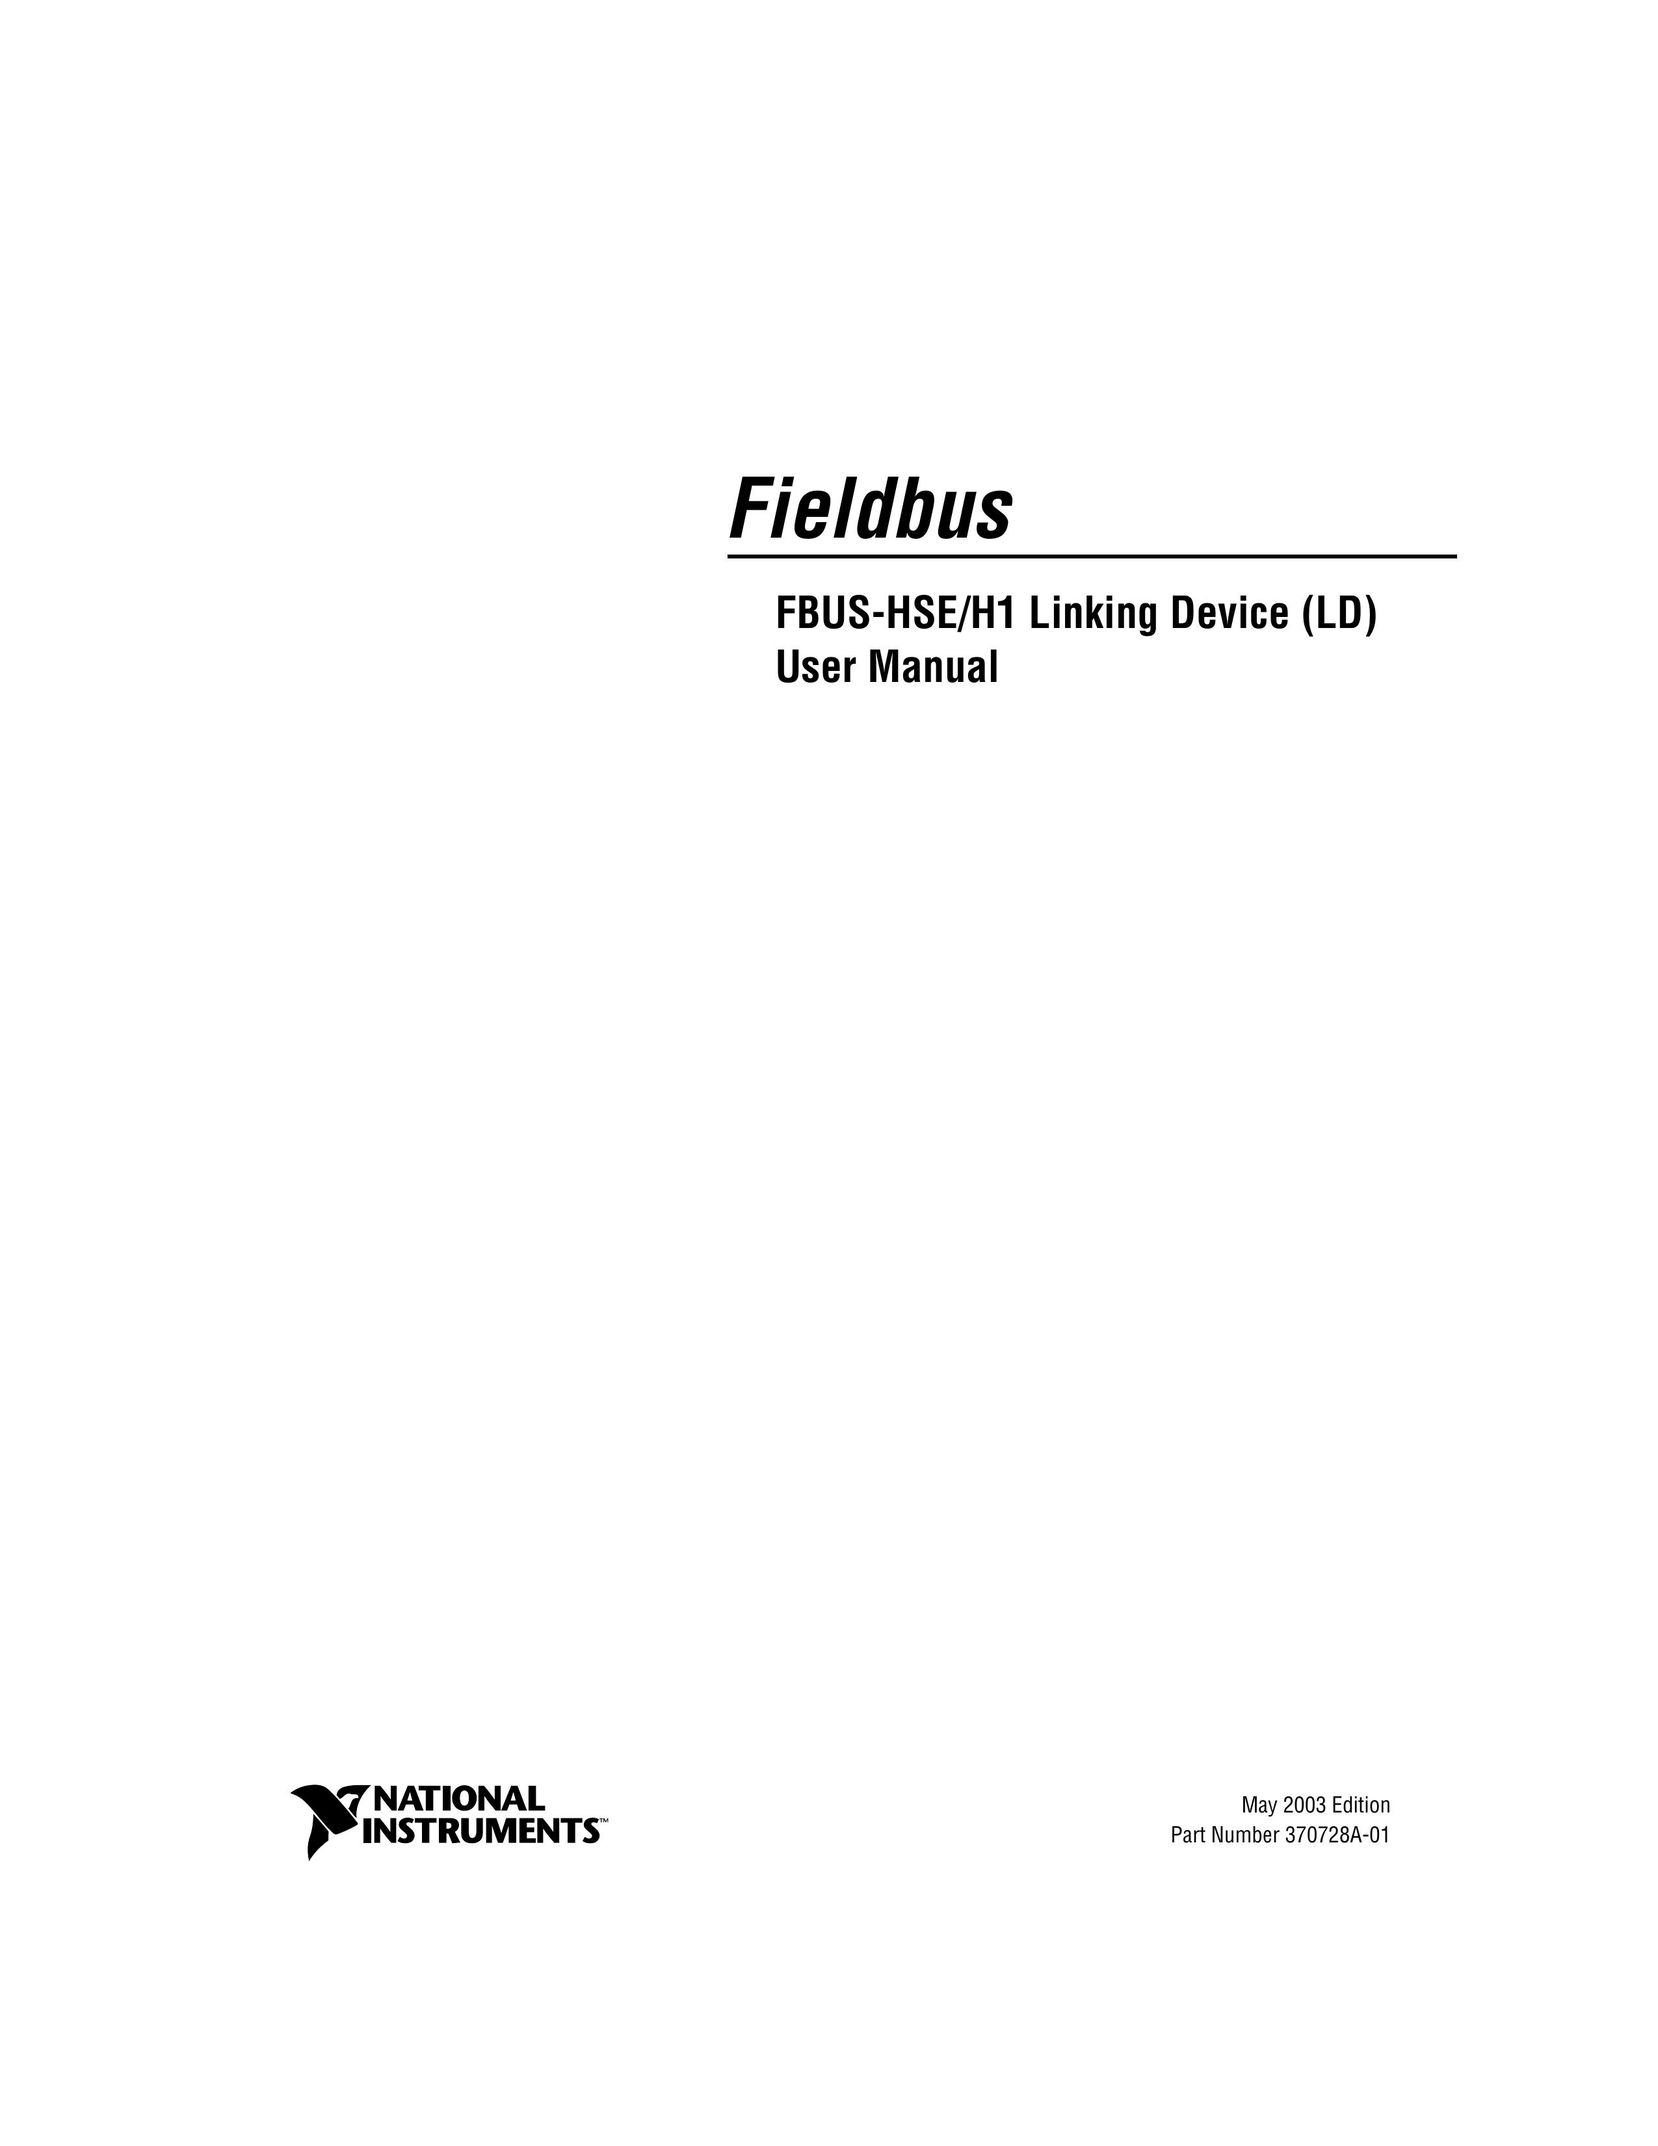 National Instruments Fieldbus Network Card User Manual